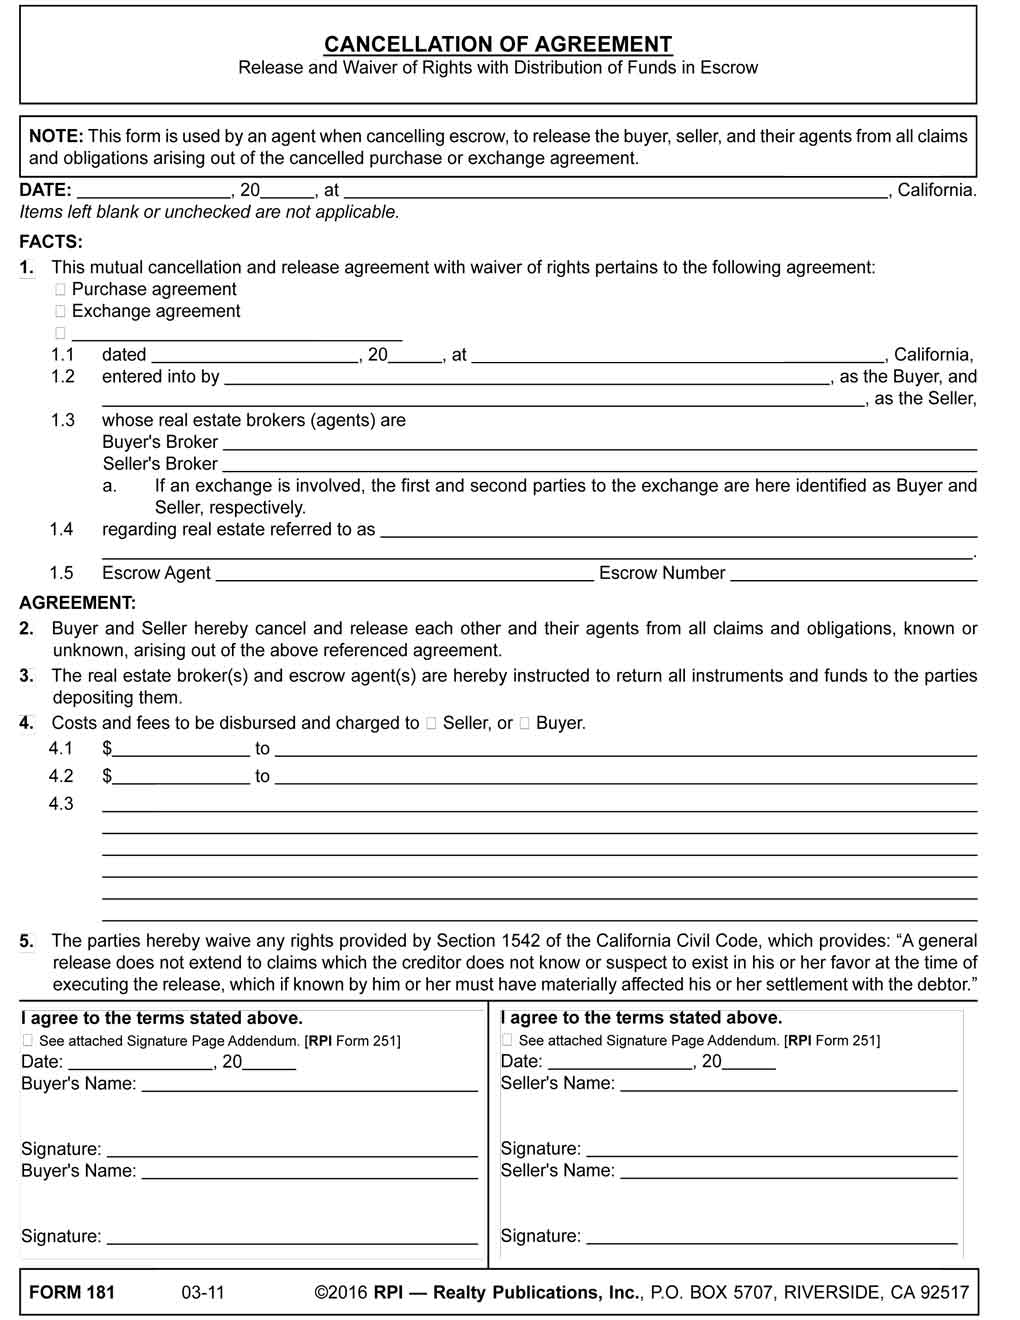 Real Estate Purchase Agreement Form Cancellation Of Agreement Release And Waiver Of Rights With